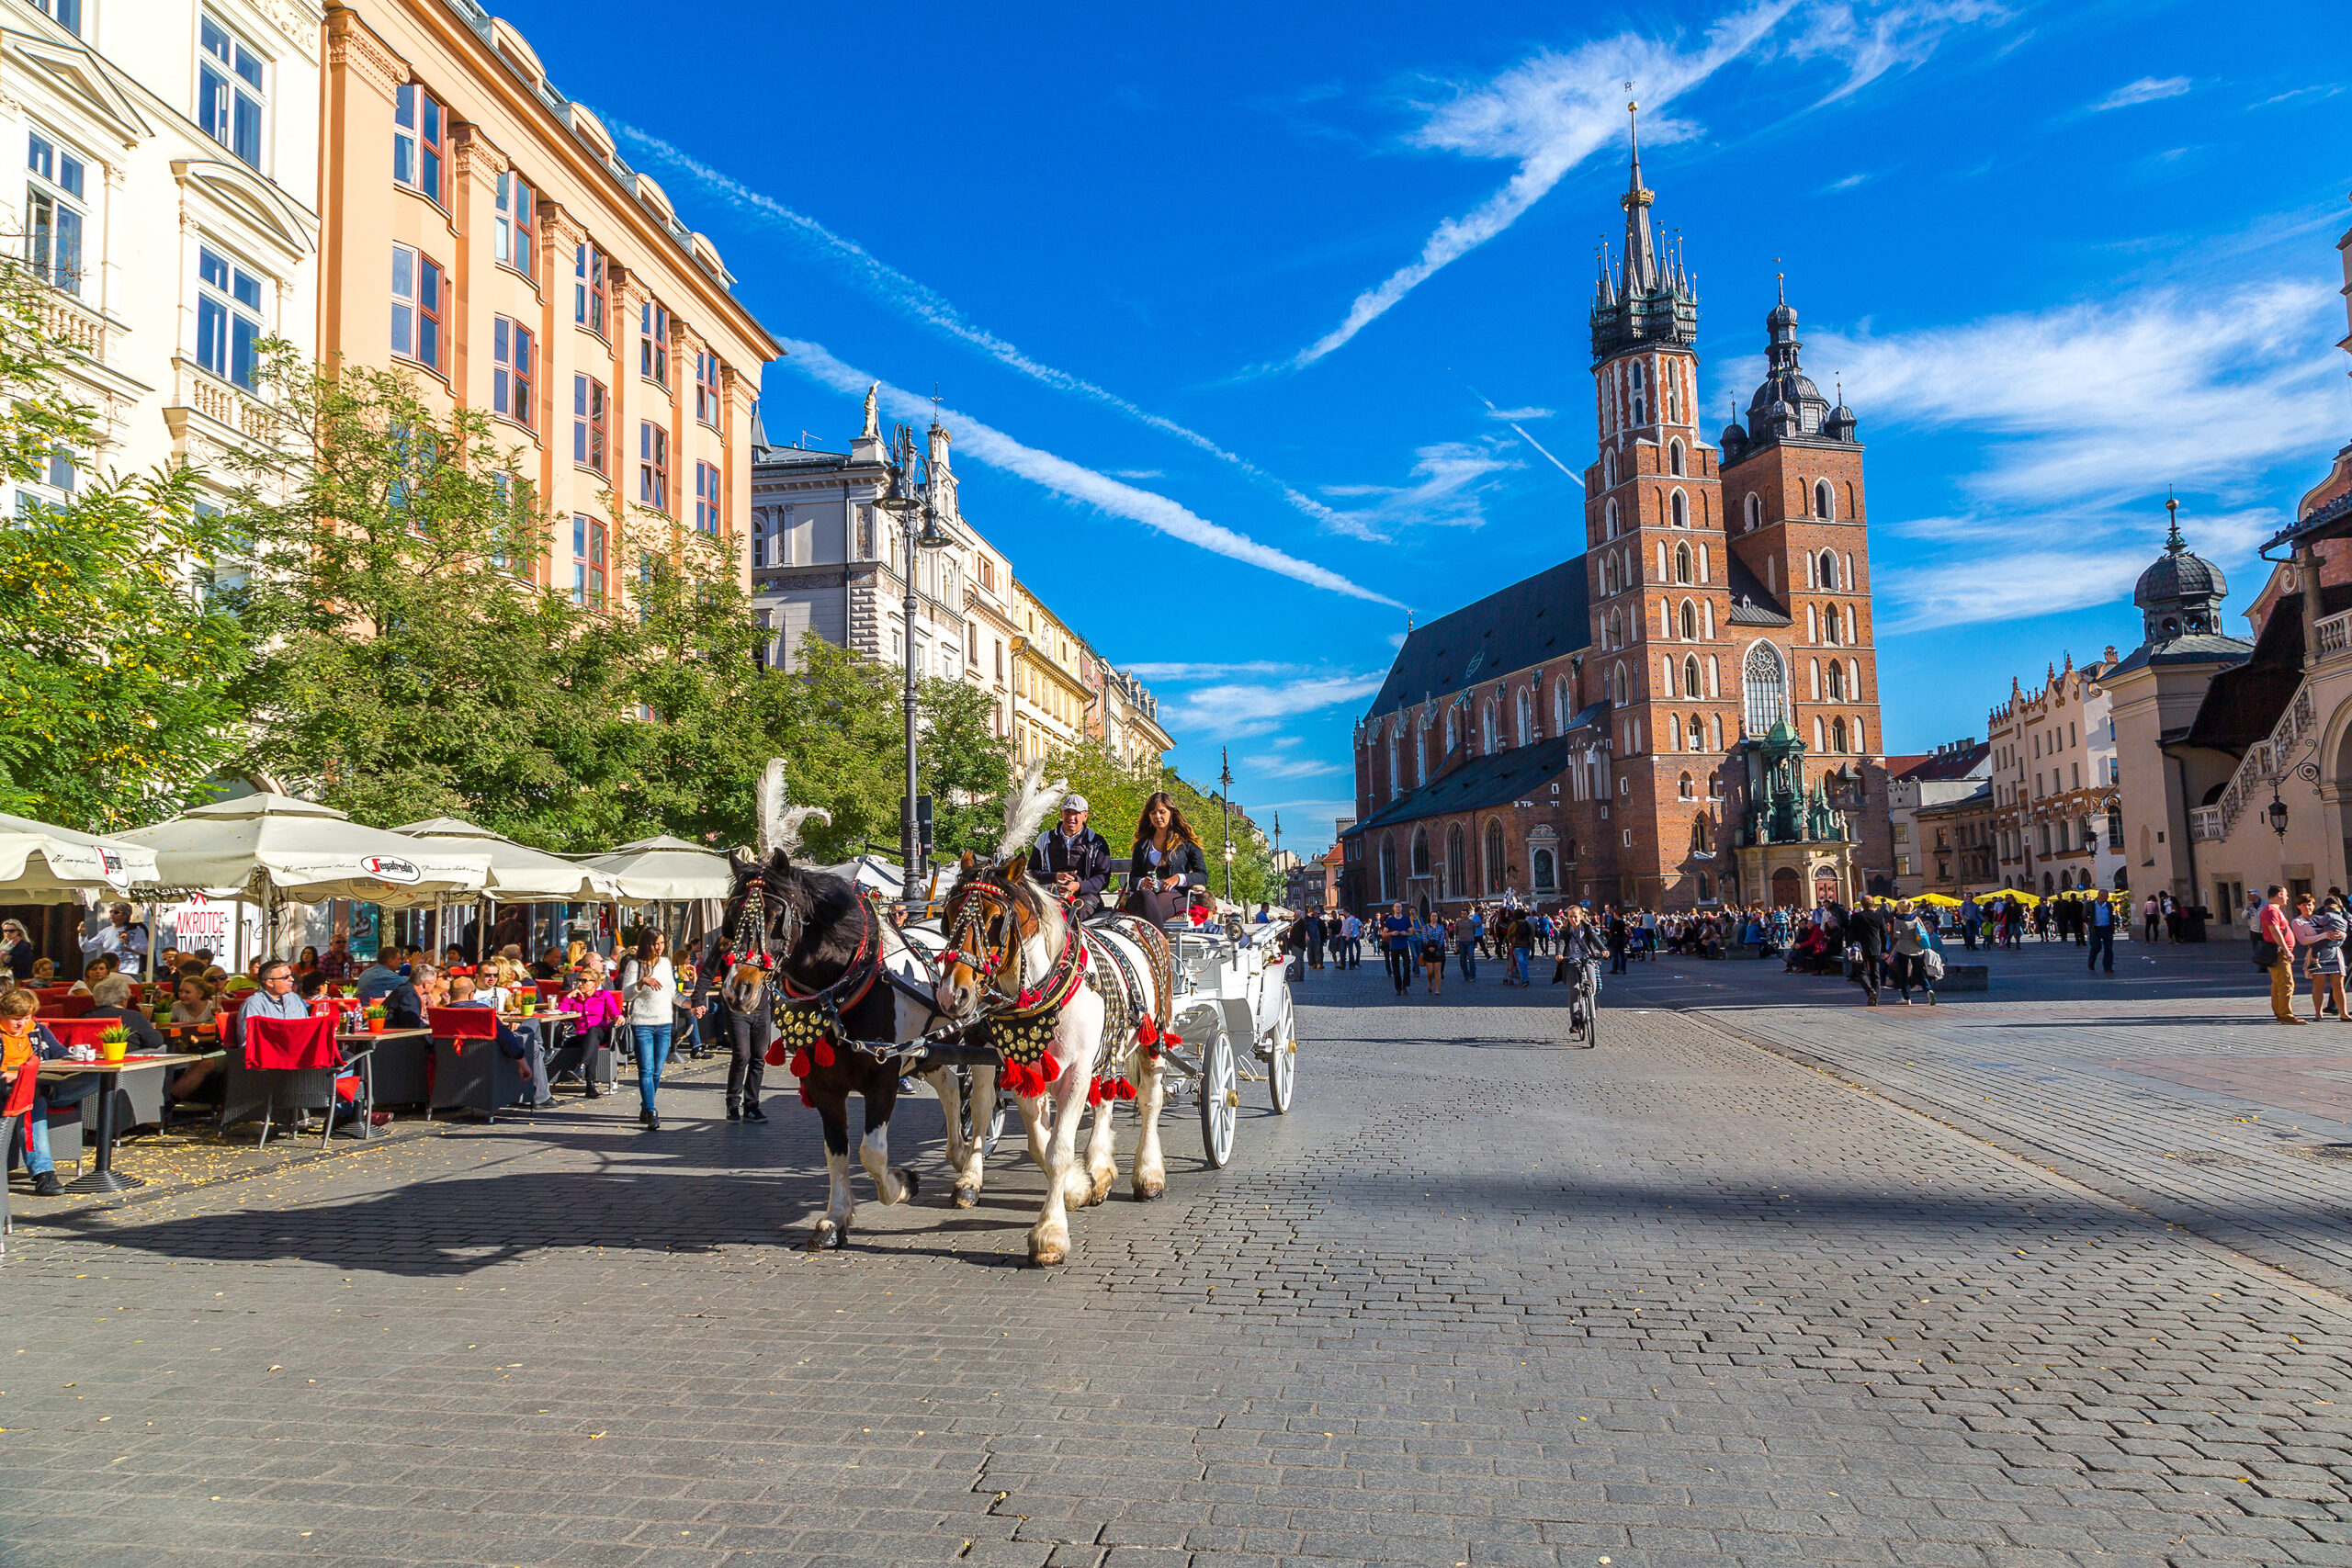 Horse carriages at main square in krakow